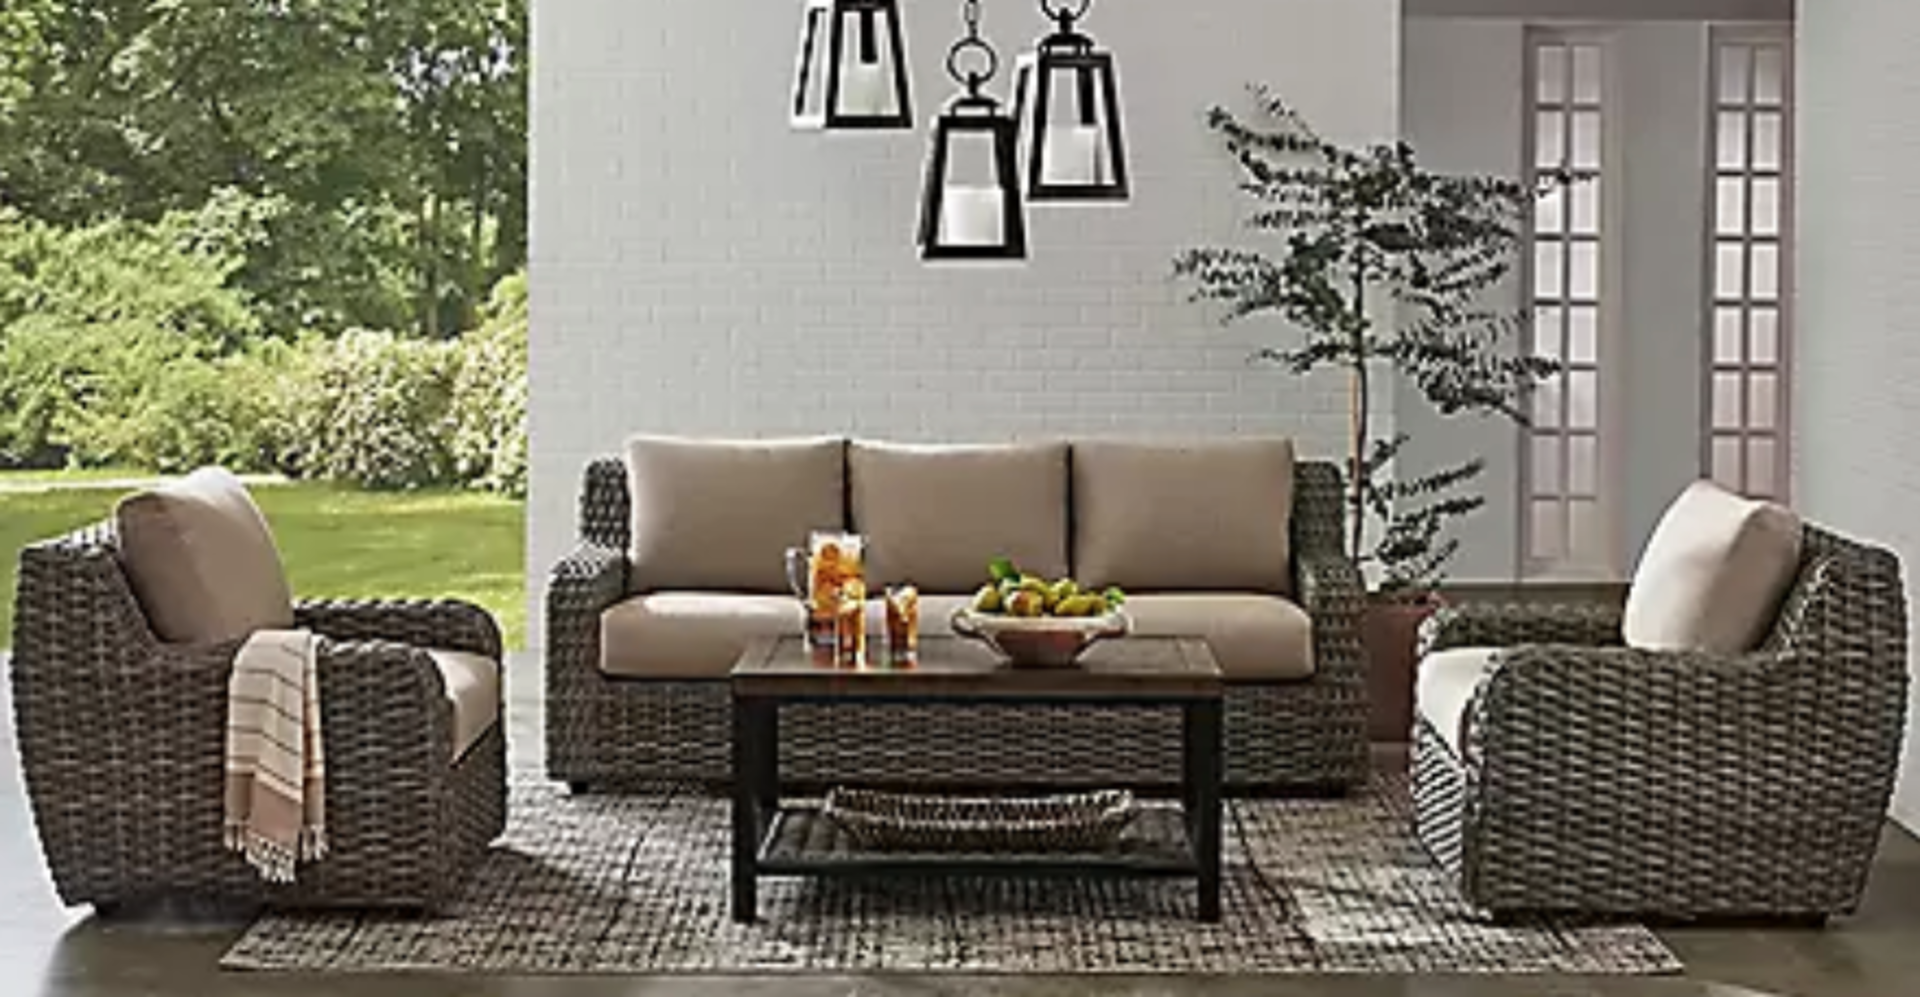 4 pc deep seating set, and more